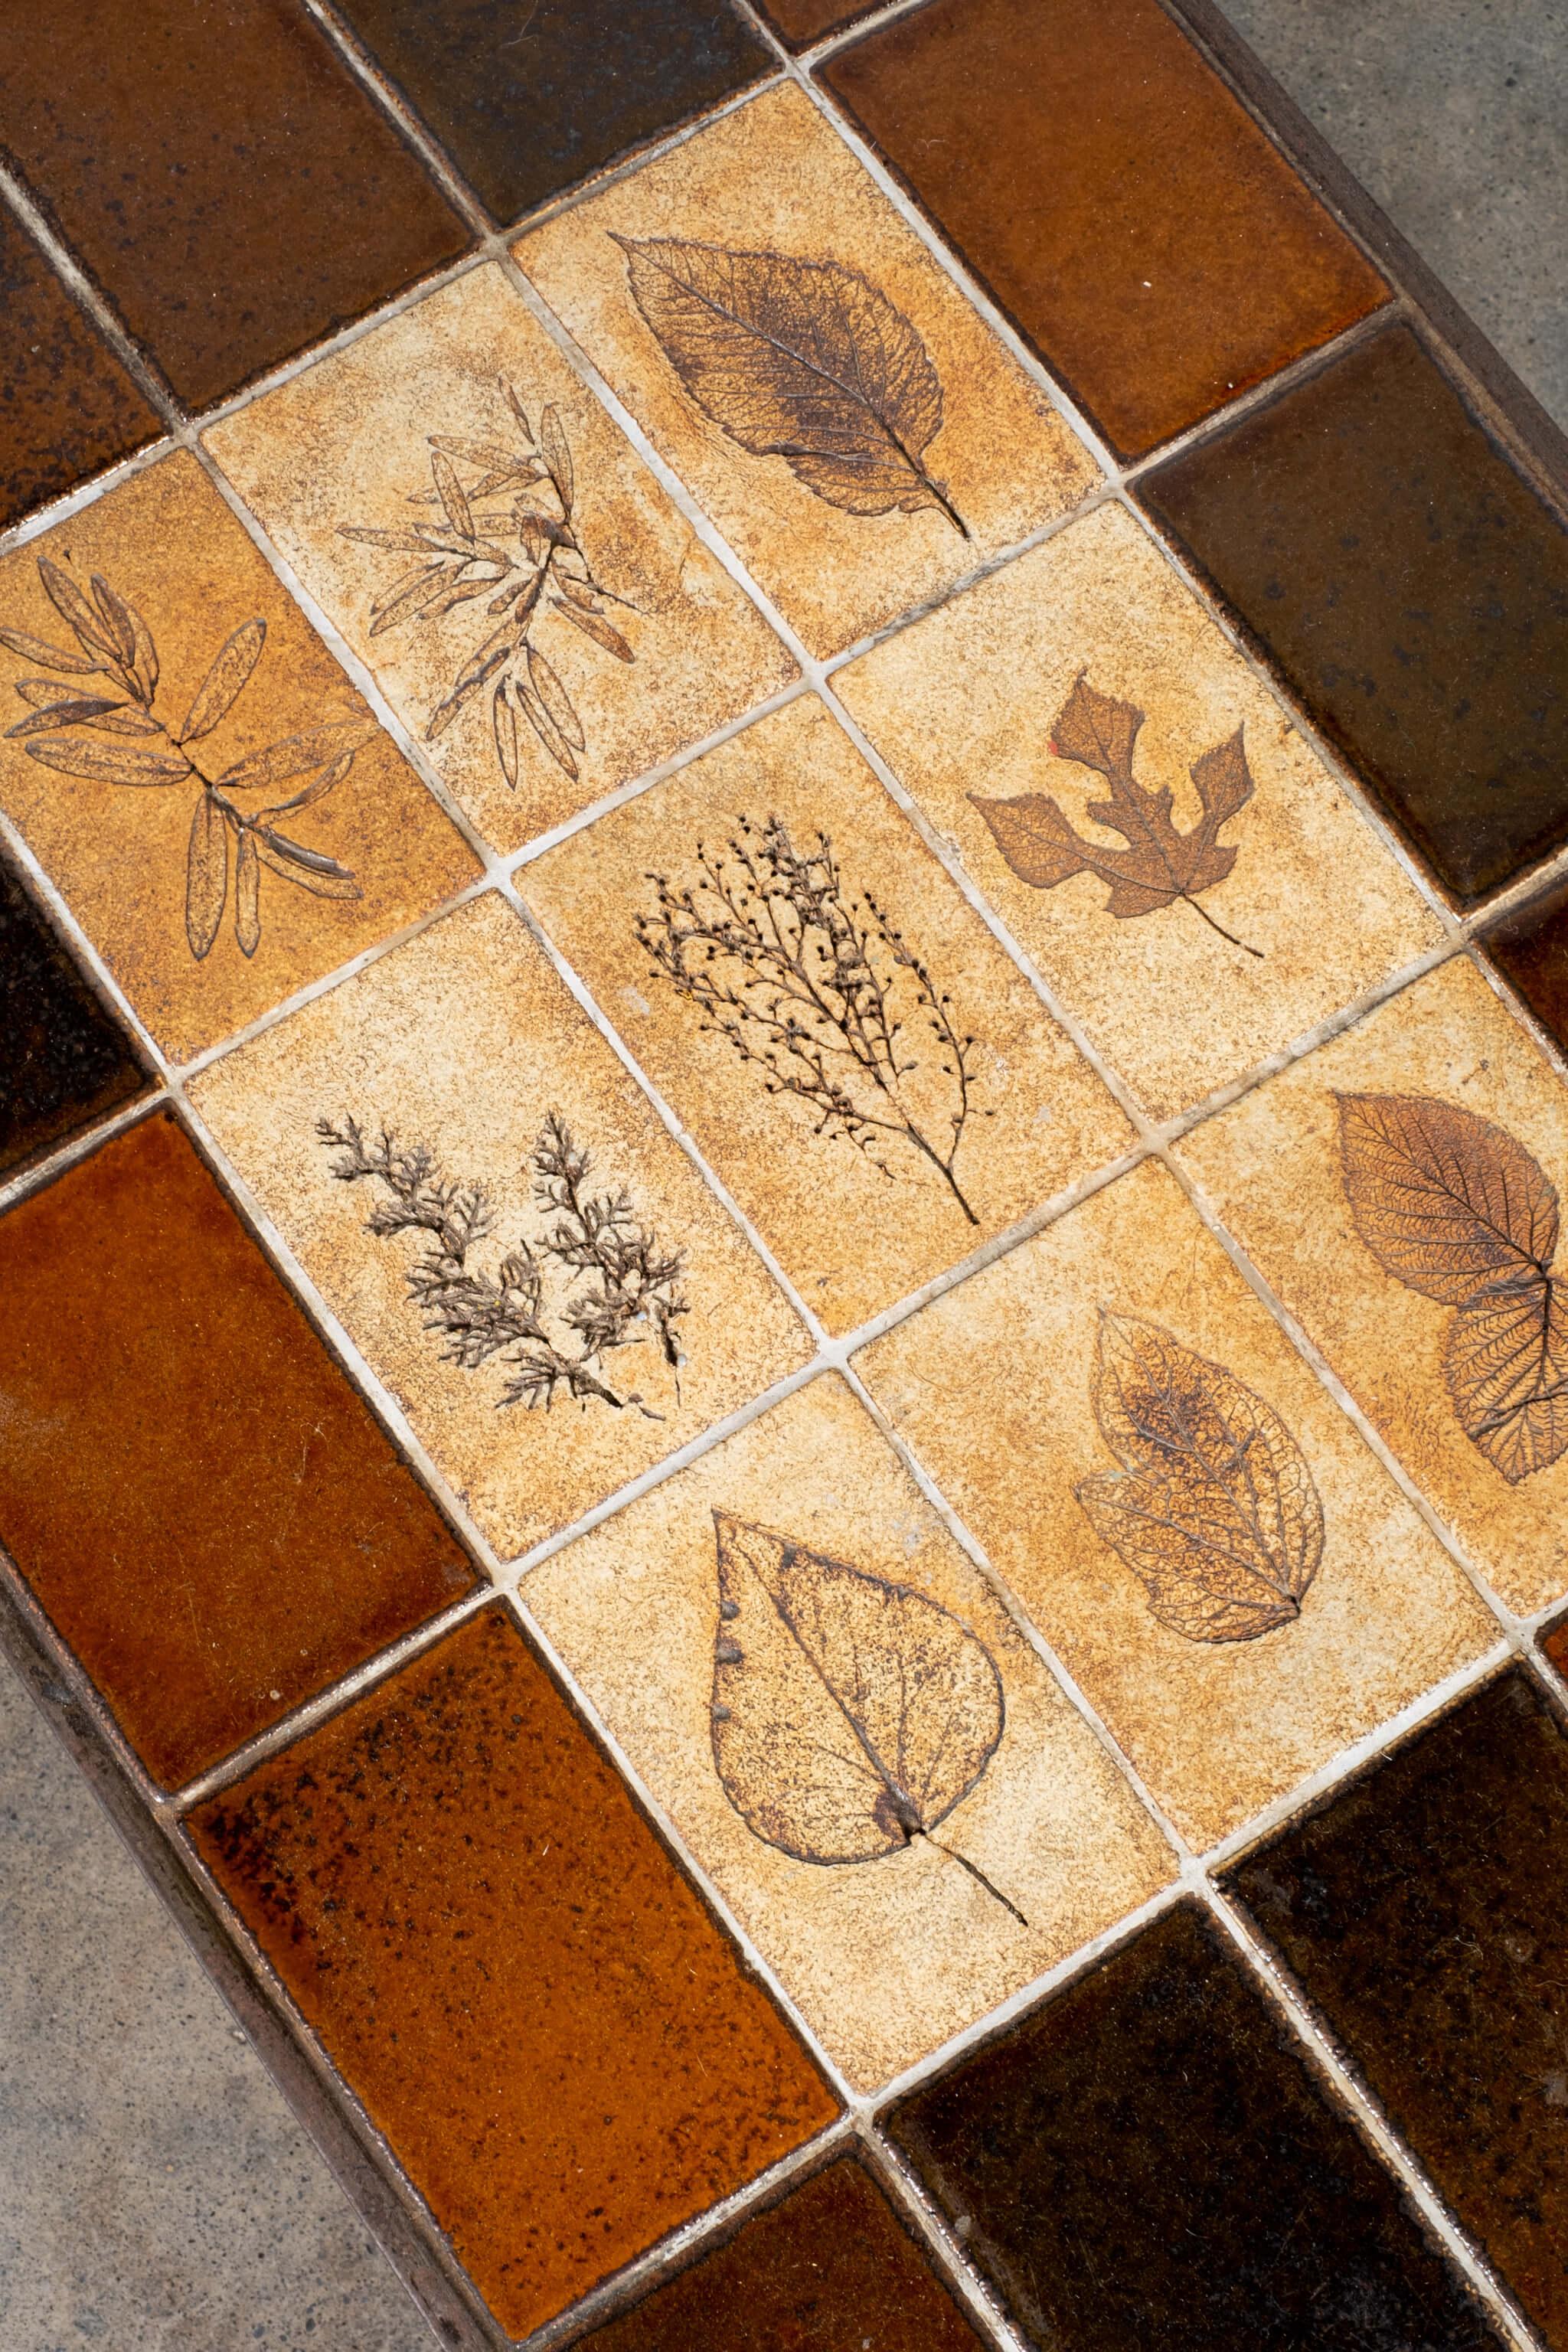 The handcrafted tiles, which were produced for about 15 years - from the mid 1960s to the late 1970s - were produced by a technique in which real leaves were pressed into the clay and disintegrated during firing, leaving a finely detailed imprint.